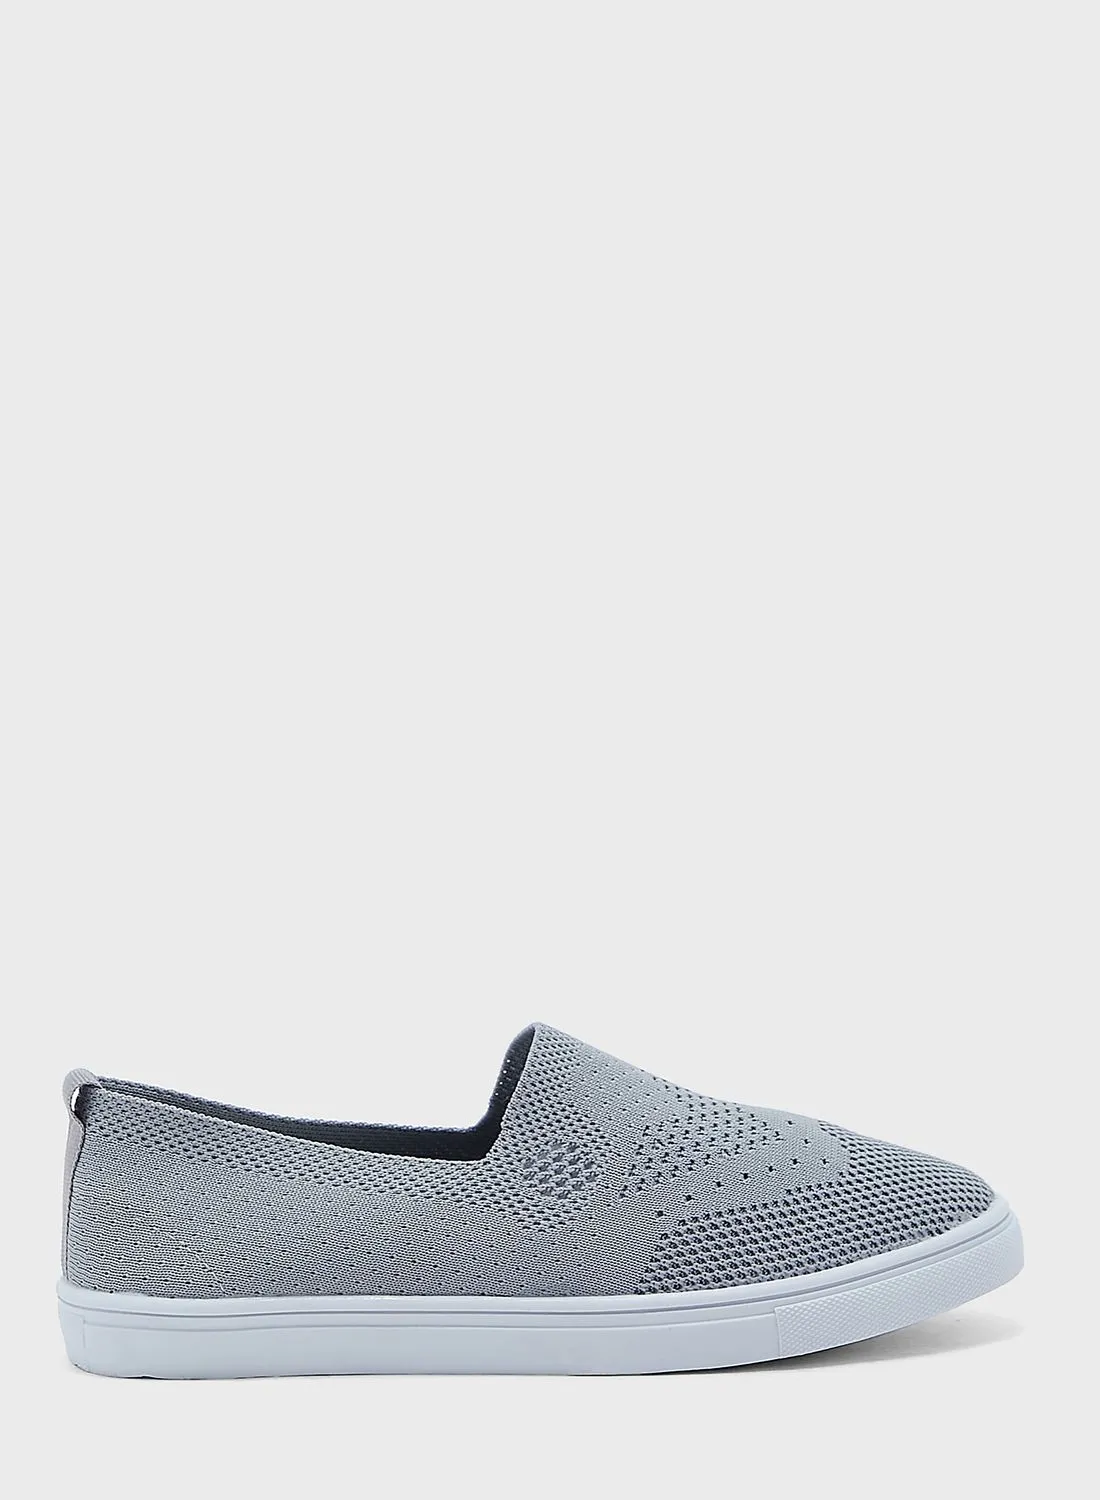 Ginger Textured Knit Pull On Comfort Shoe